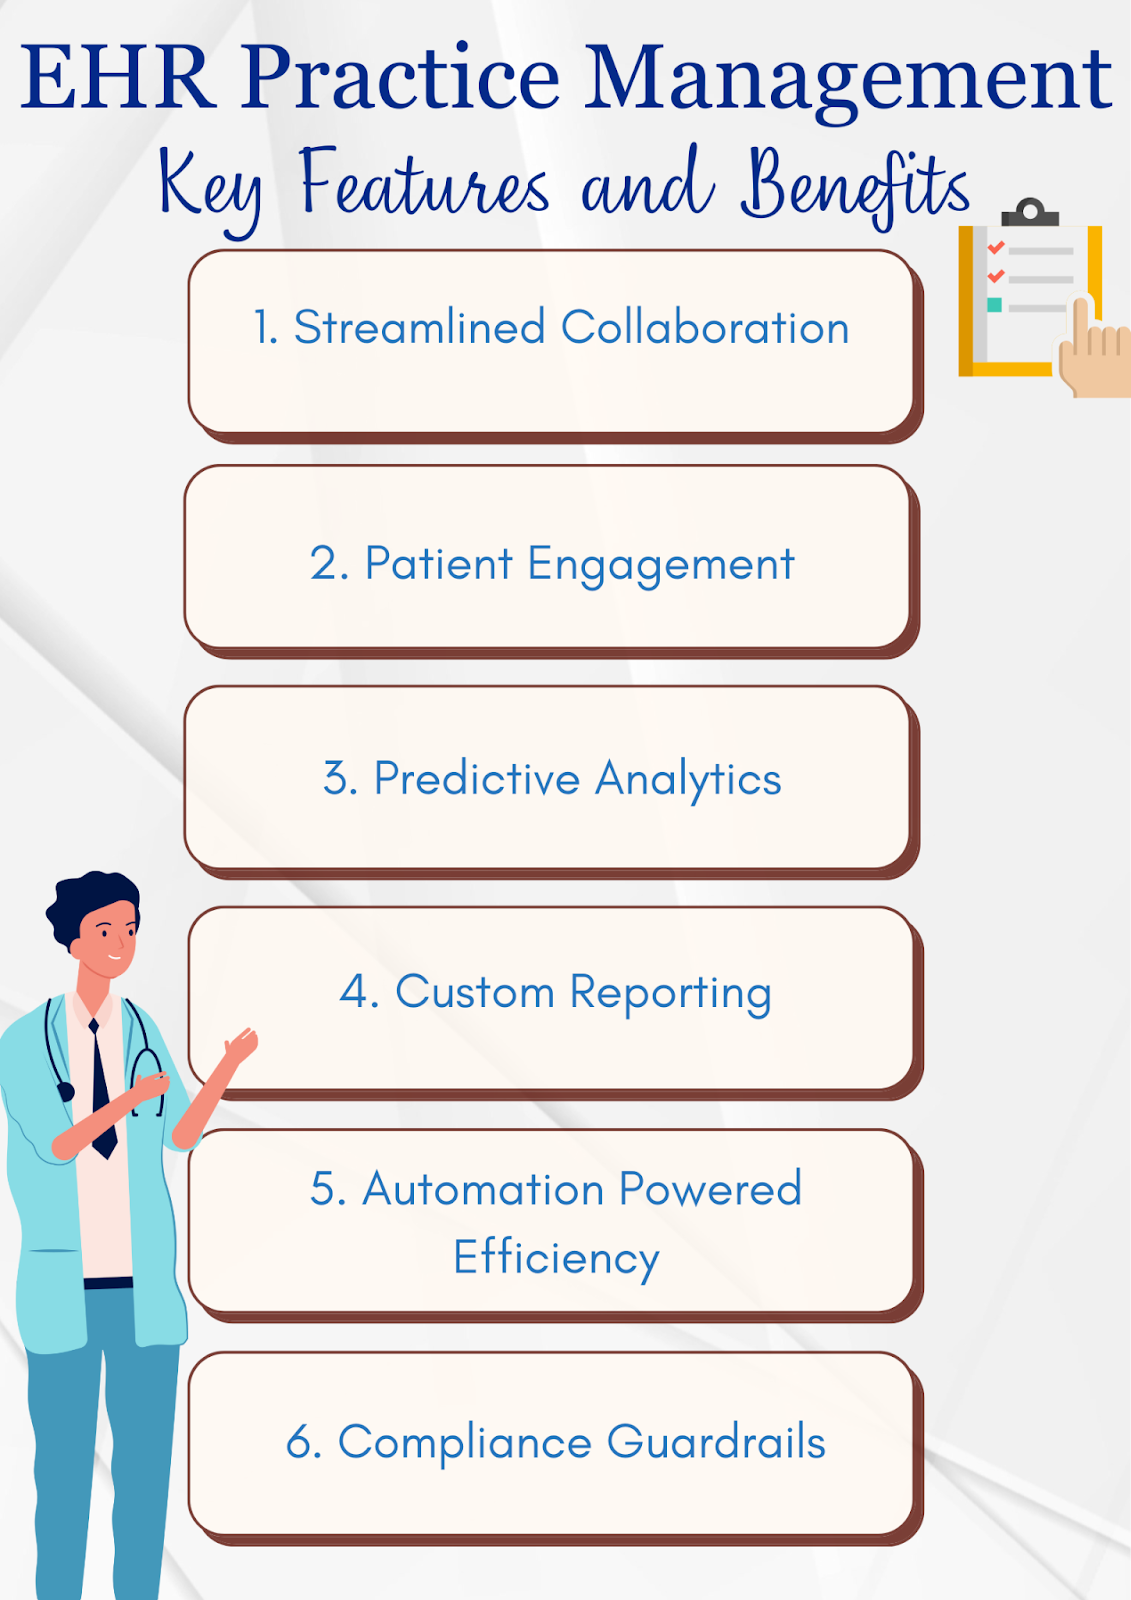 EHR Practice Management Key Features and Benefits